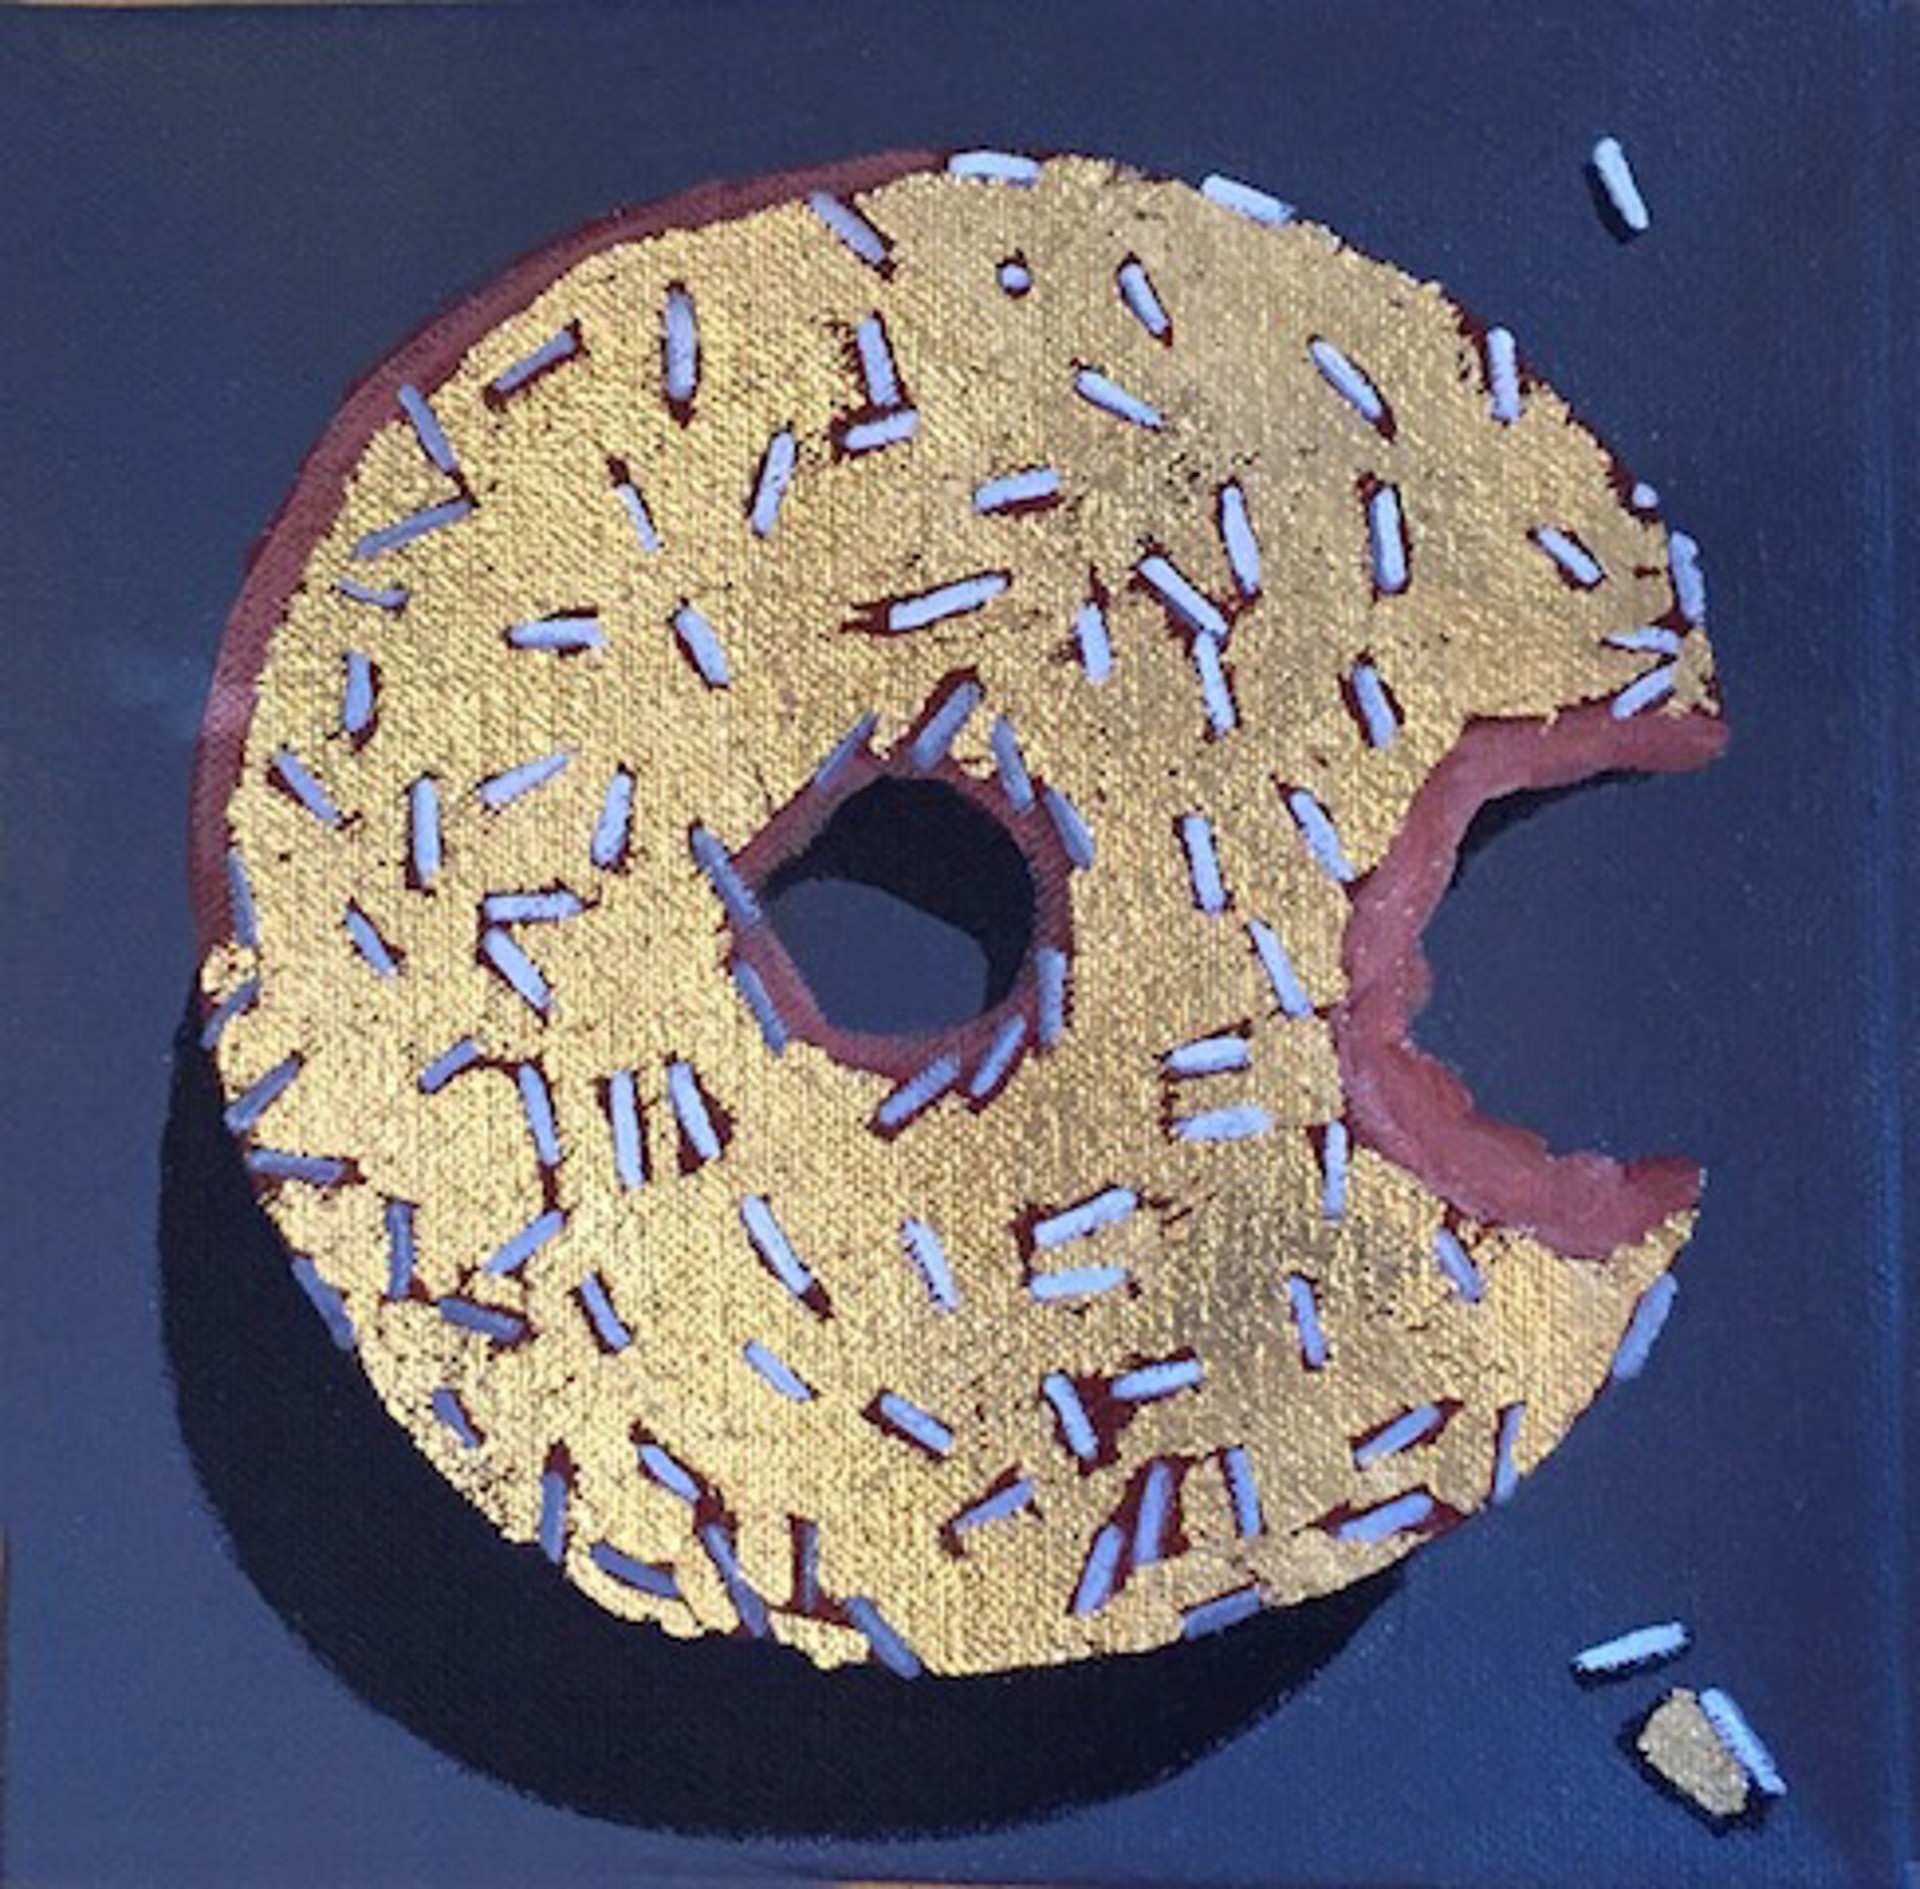 Gold Leaf with Sprinkles II by Terry Romero Paul